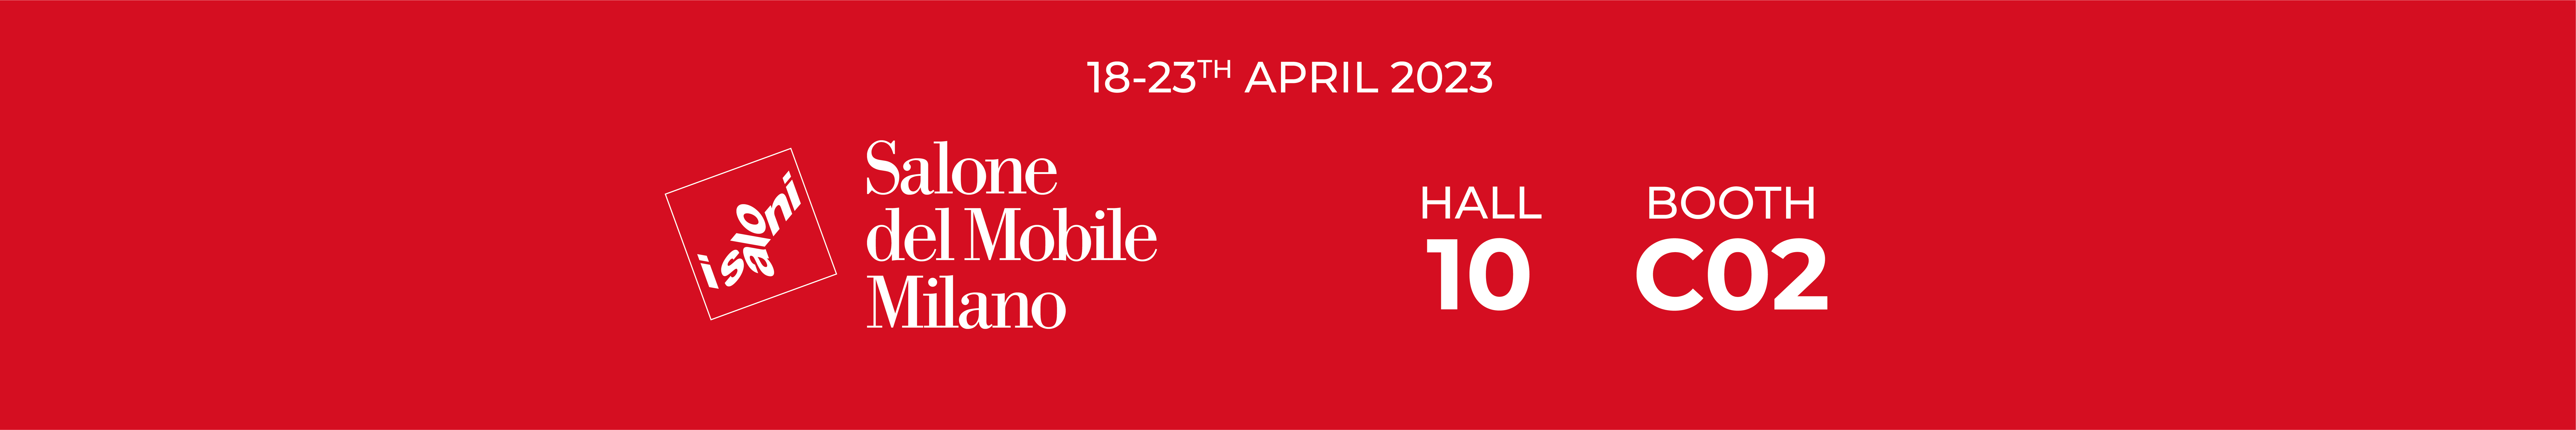 Barausse will be attending the next Salone del Mobile international furniture fair in Milan. Pavilion 10, booth C02. From the 18th to the 23th April 2023.